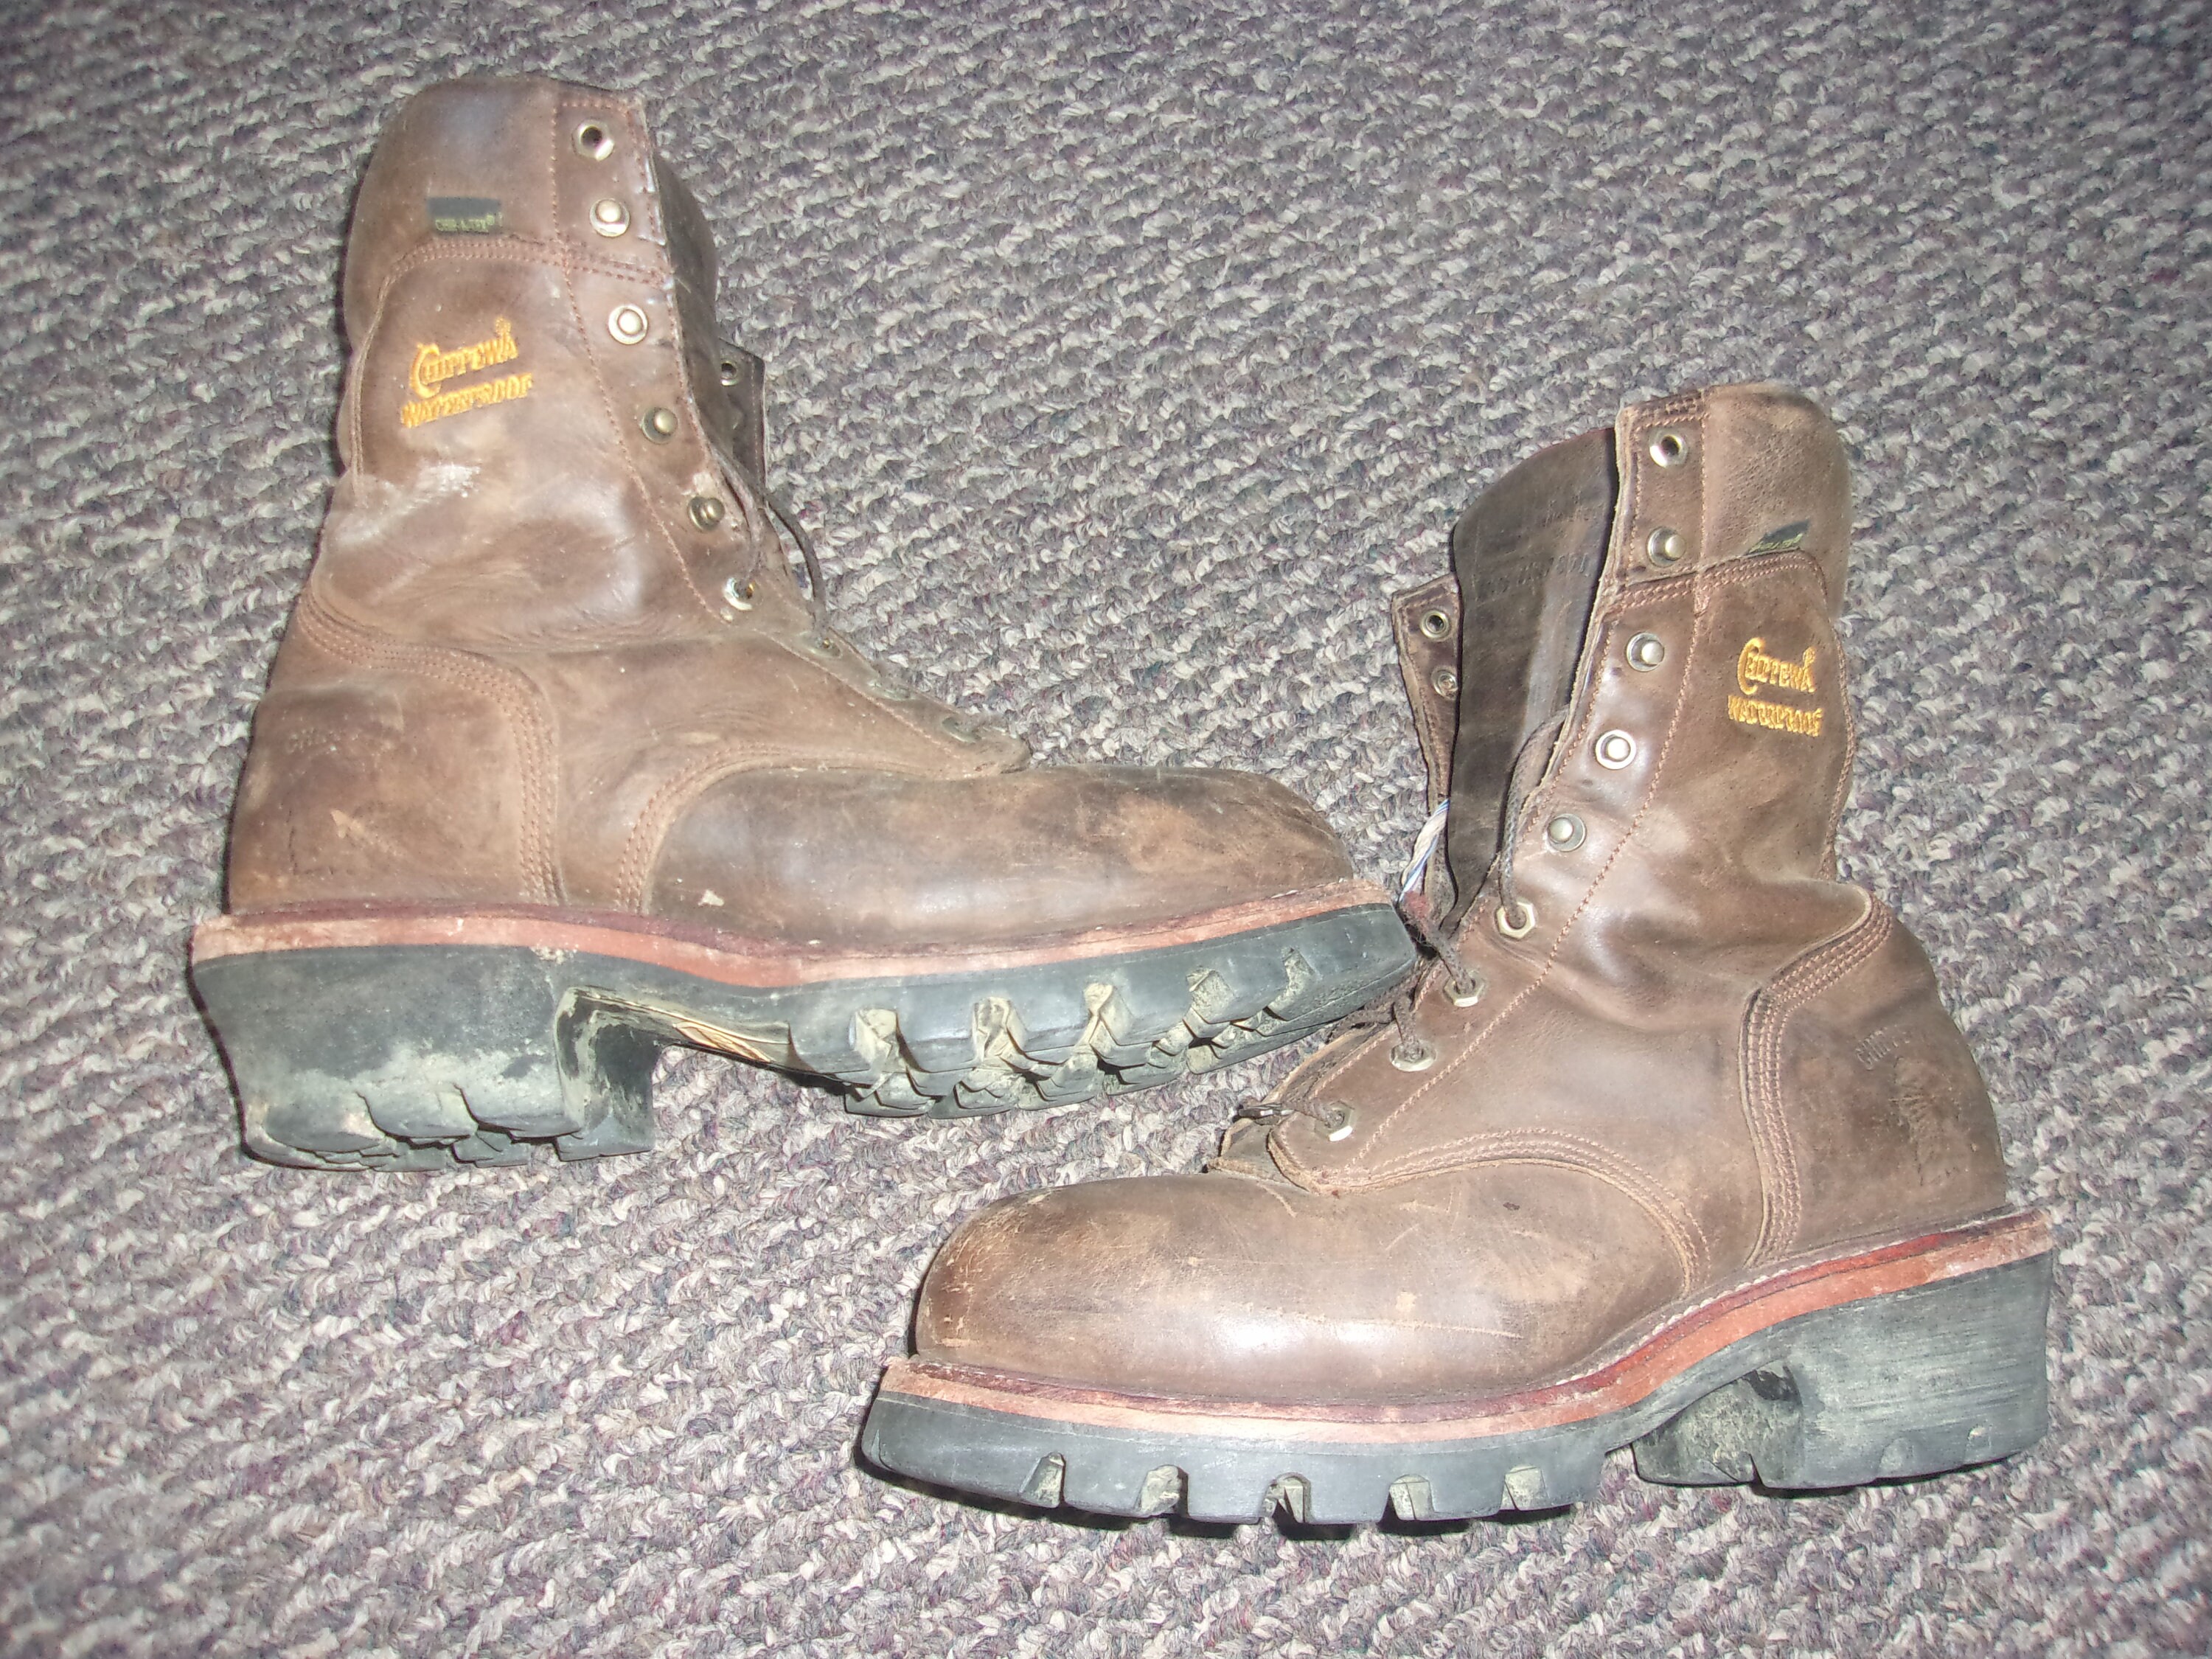 Vintage Chippewa Super Logger Boots Steal Toe Work Boots - Etsy